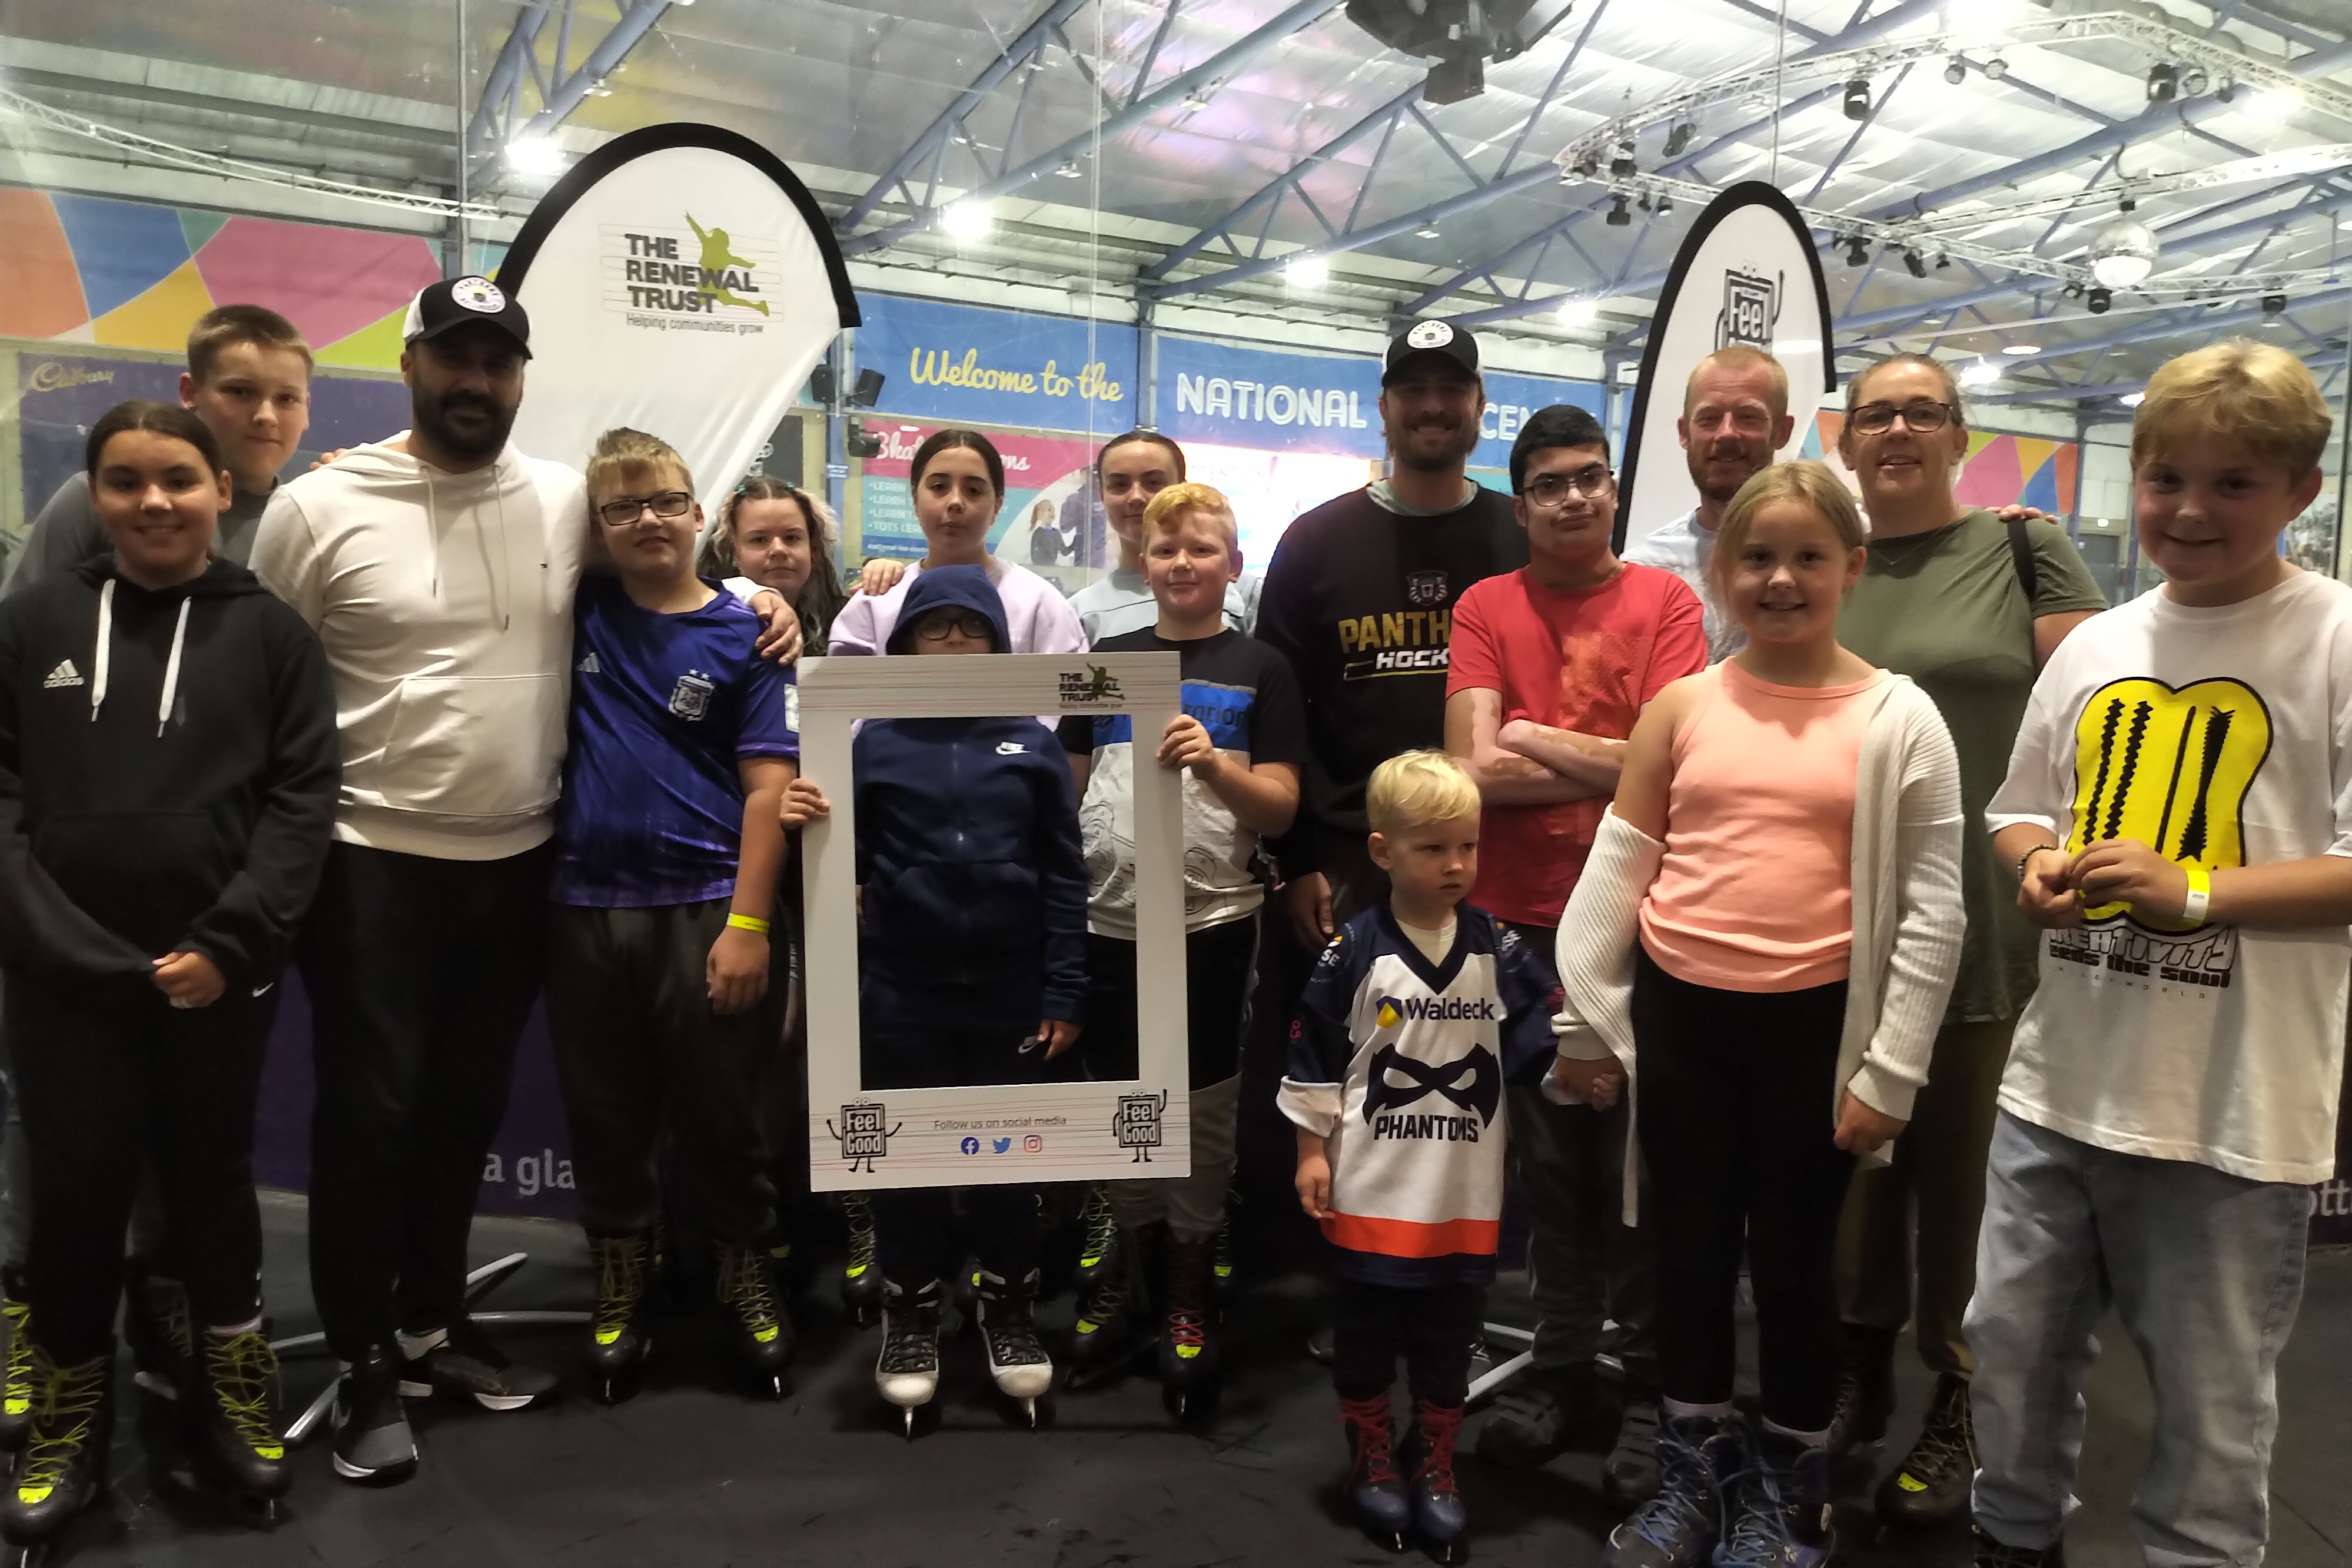 COACHES MEET SKATERS AT RENEWAL TRUST EVENT Top Image